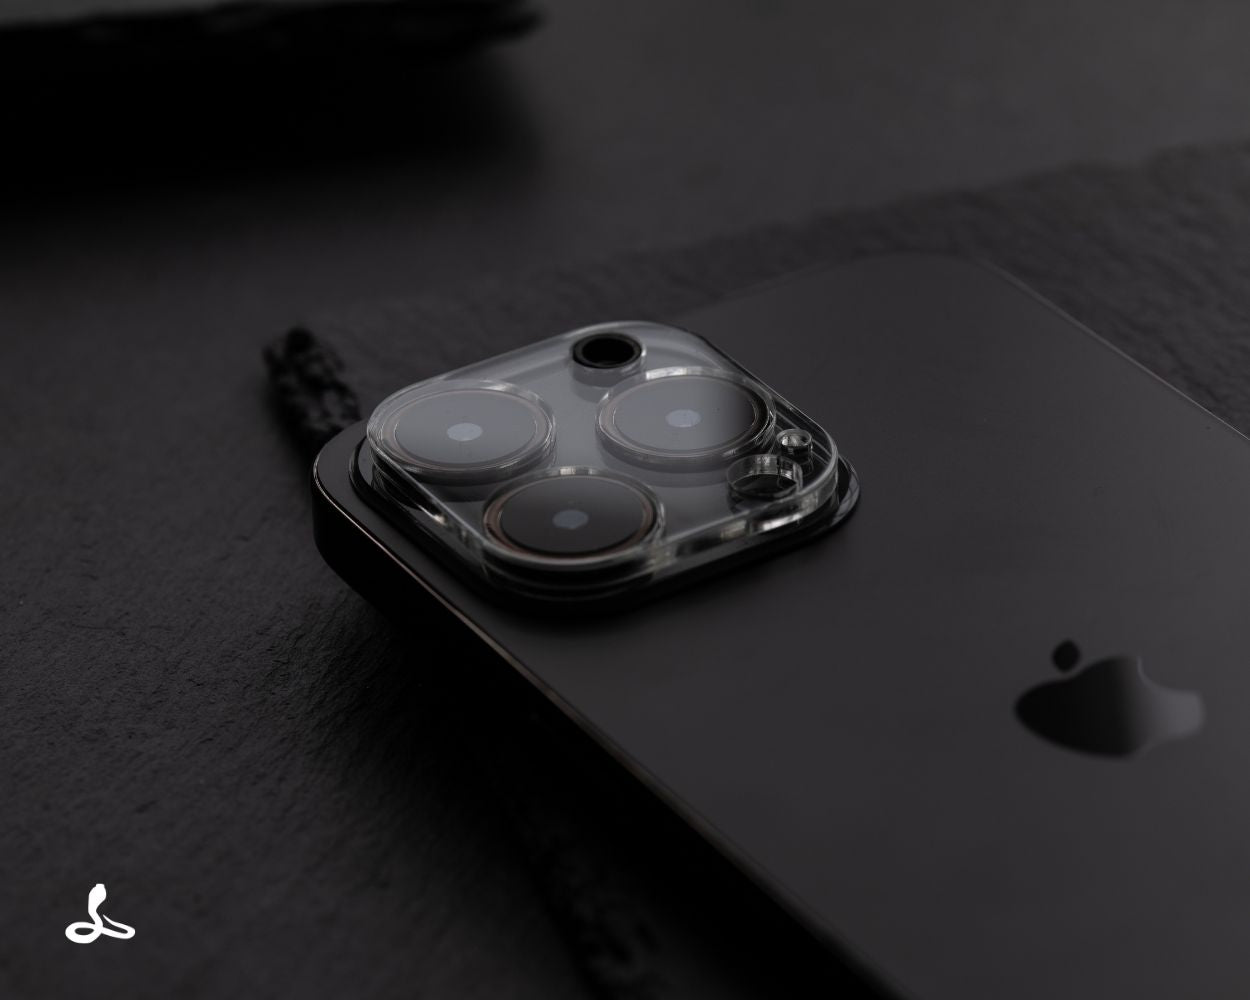 Premium Lens protector for Apple iPhone 11 Pro